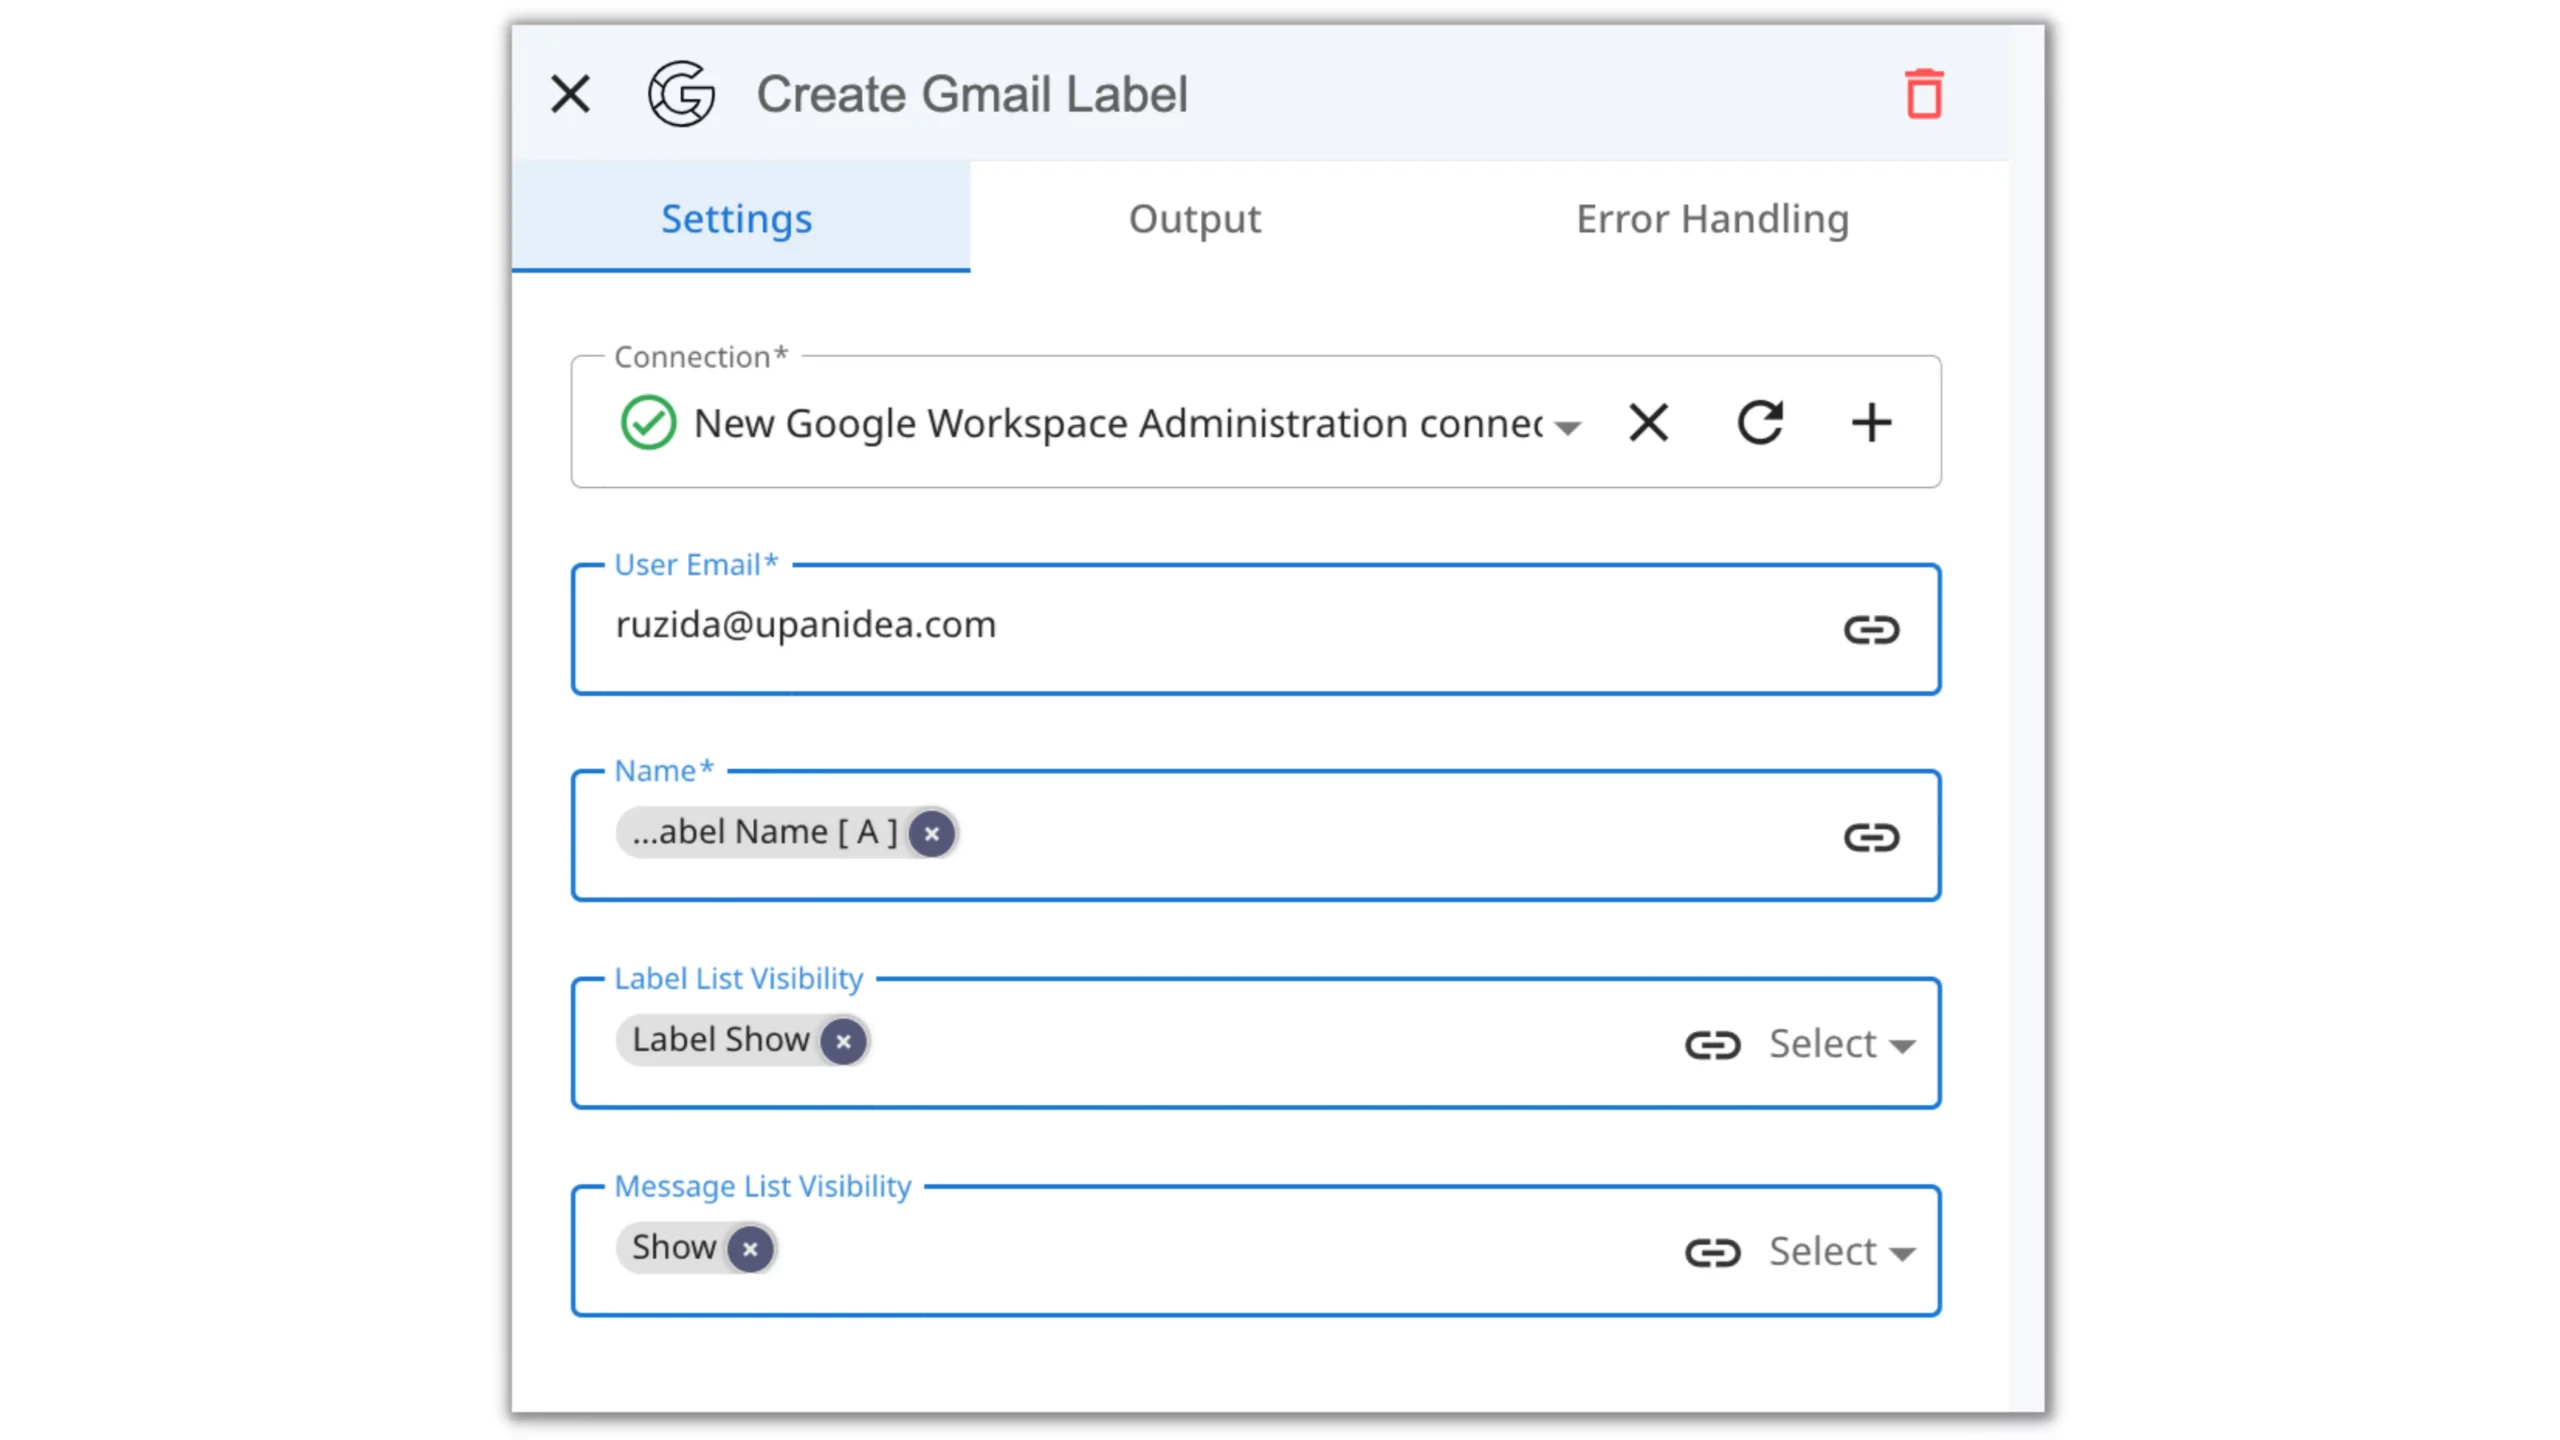 The example of gmail automation management for adding labels.